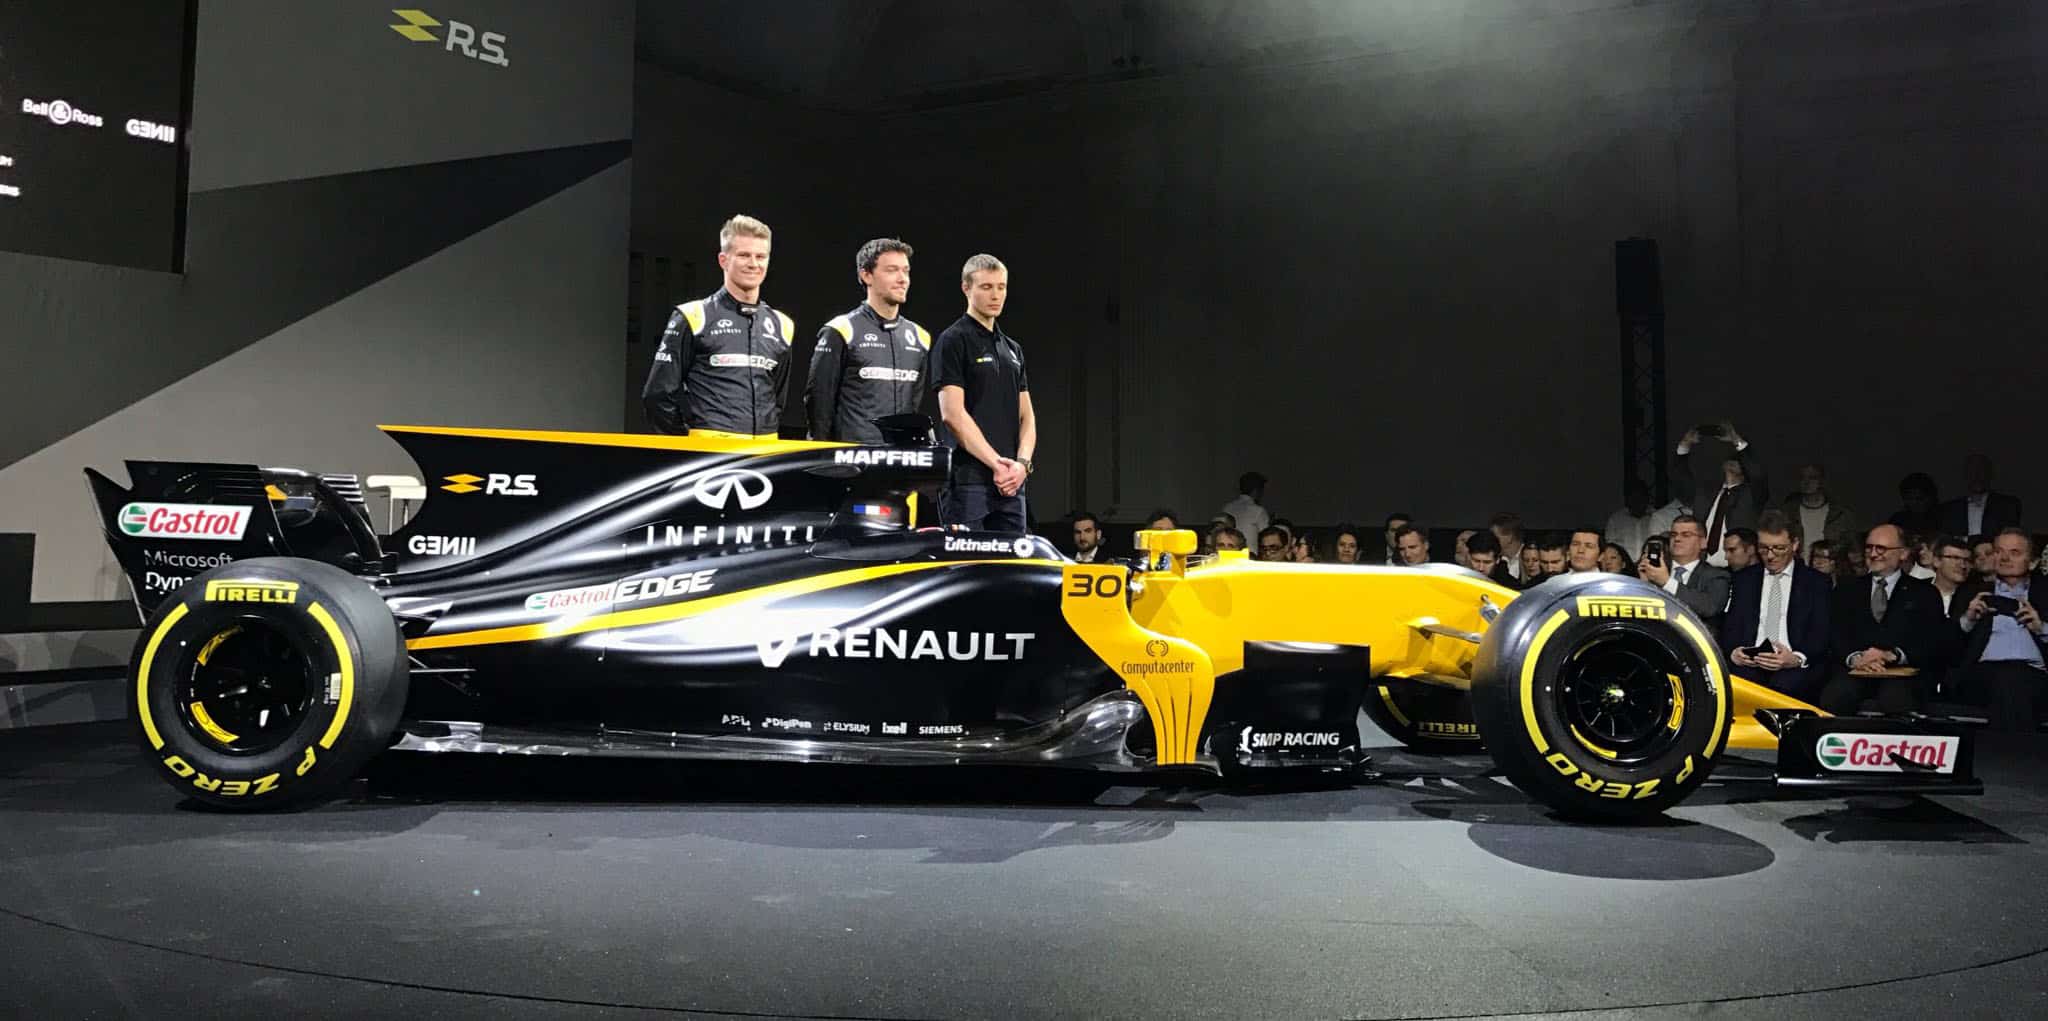 Renault’s 2017 prospects